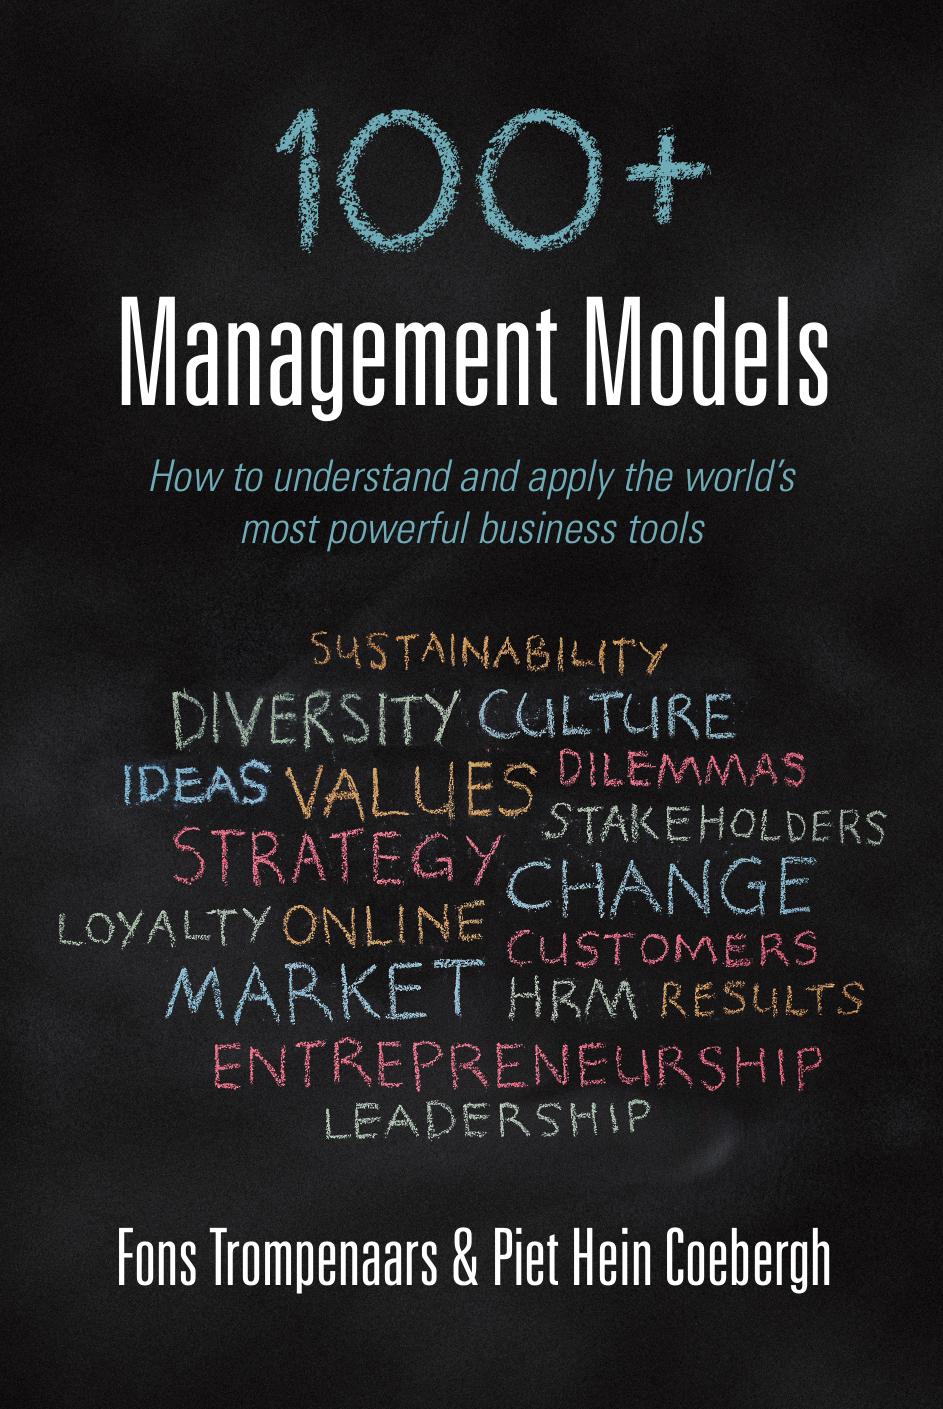 100+ Management Models: How to Understand and Apply the World's Most Powerful Business Tools